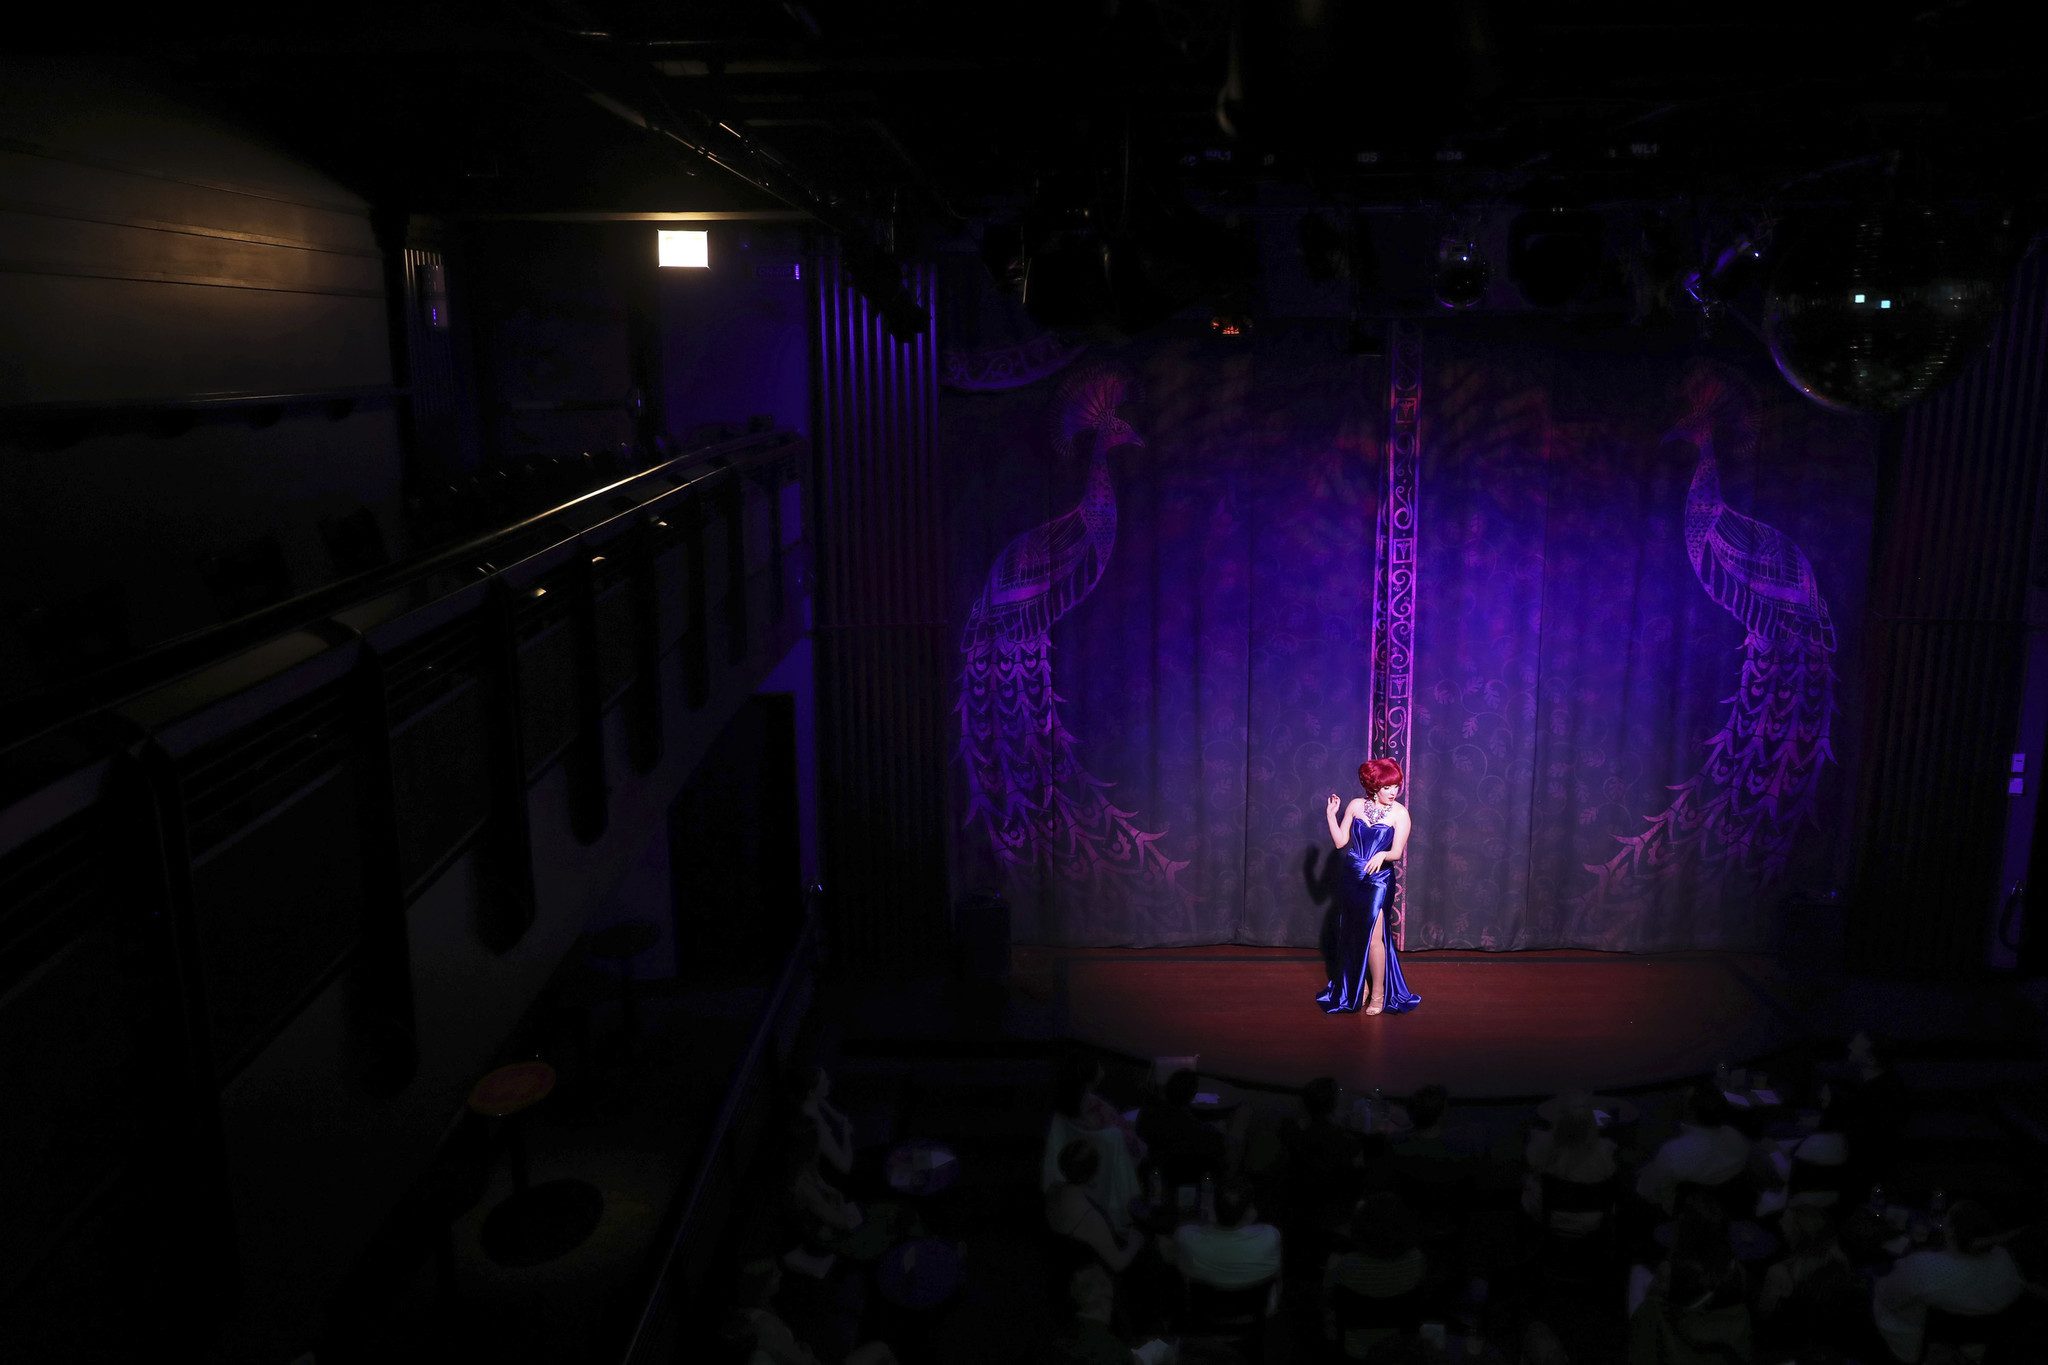 Lucy Darling magic show opens new Rhapsody Theater in Rogers Park